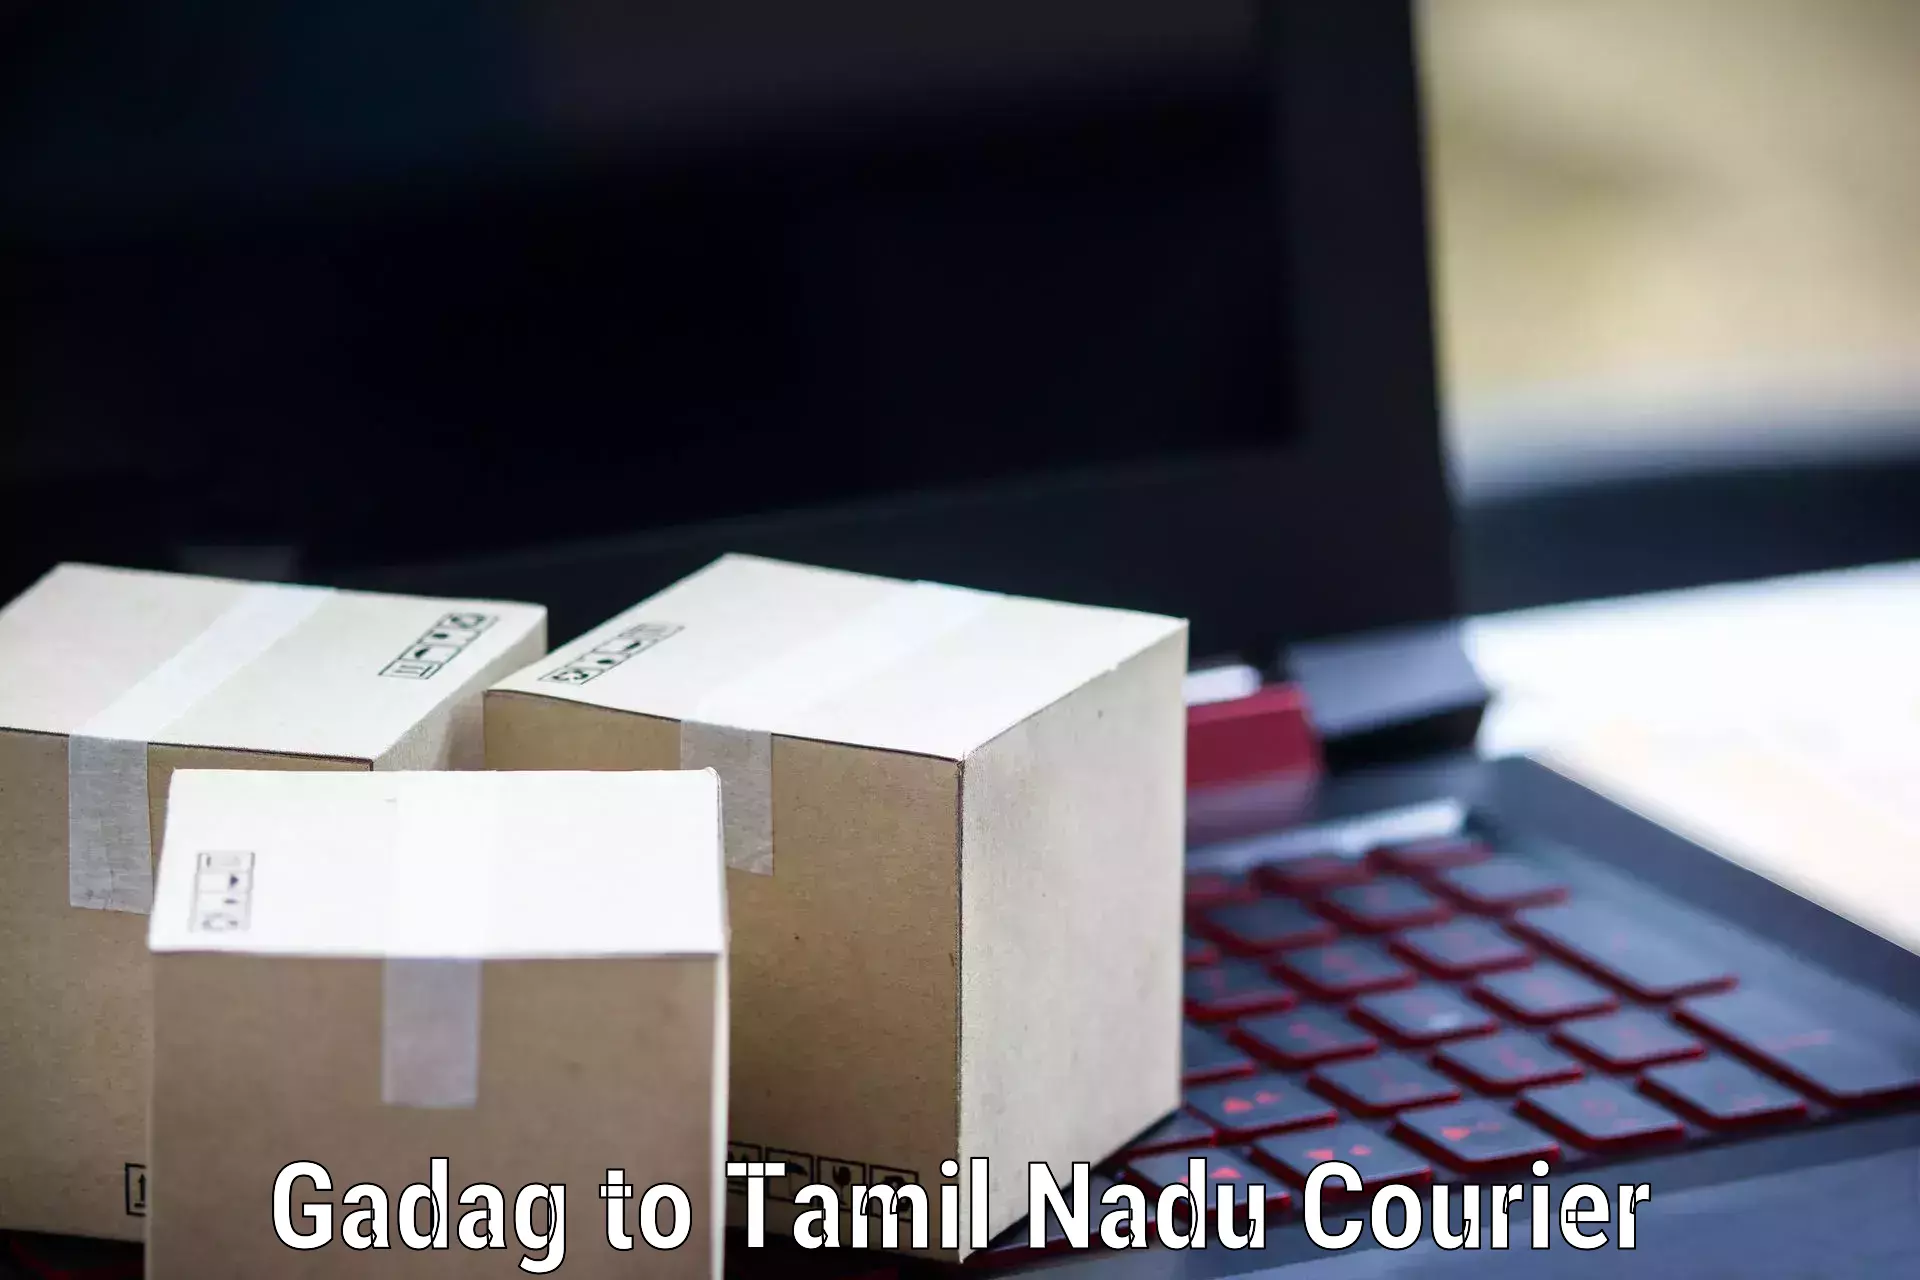 Global shipping solutions Gadag to SRM Institute of Science and Technology Chennai